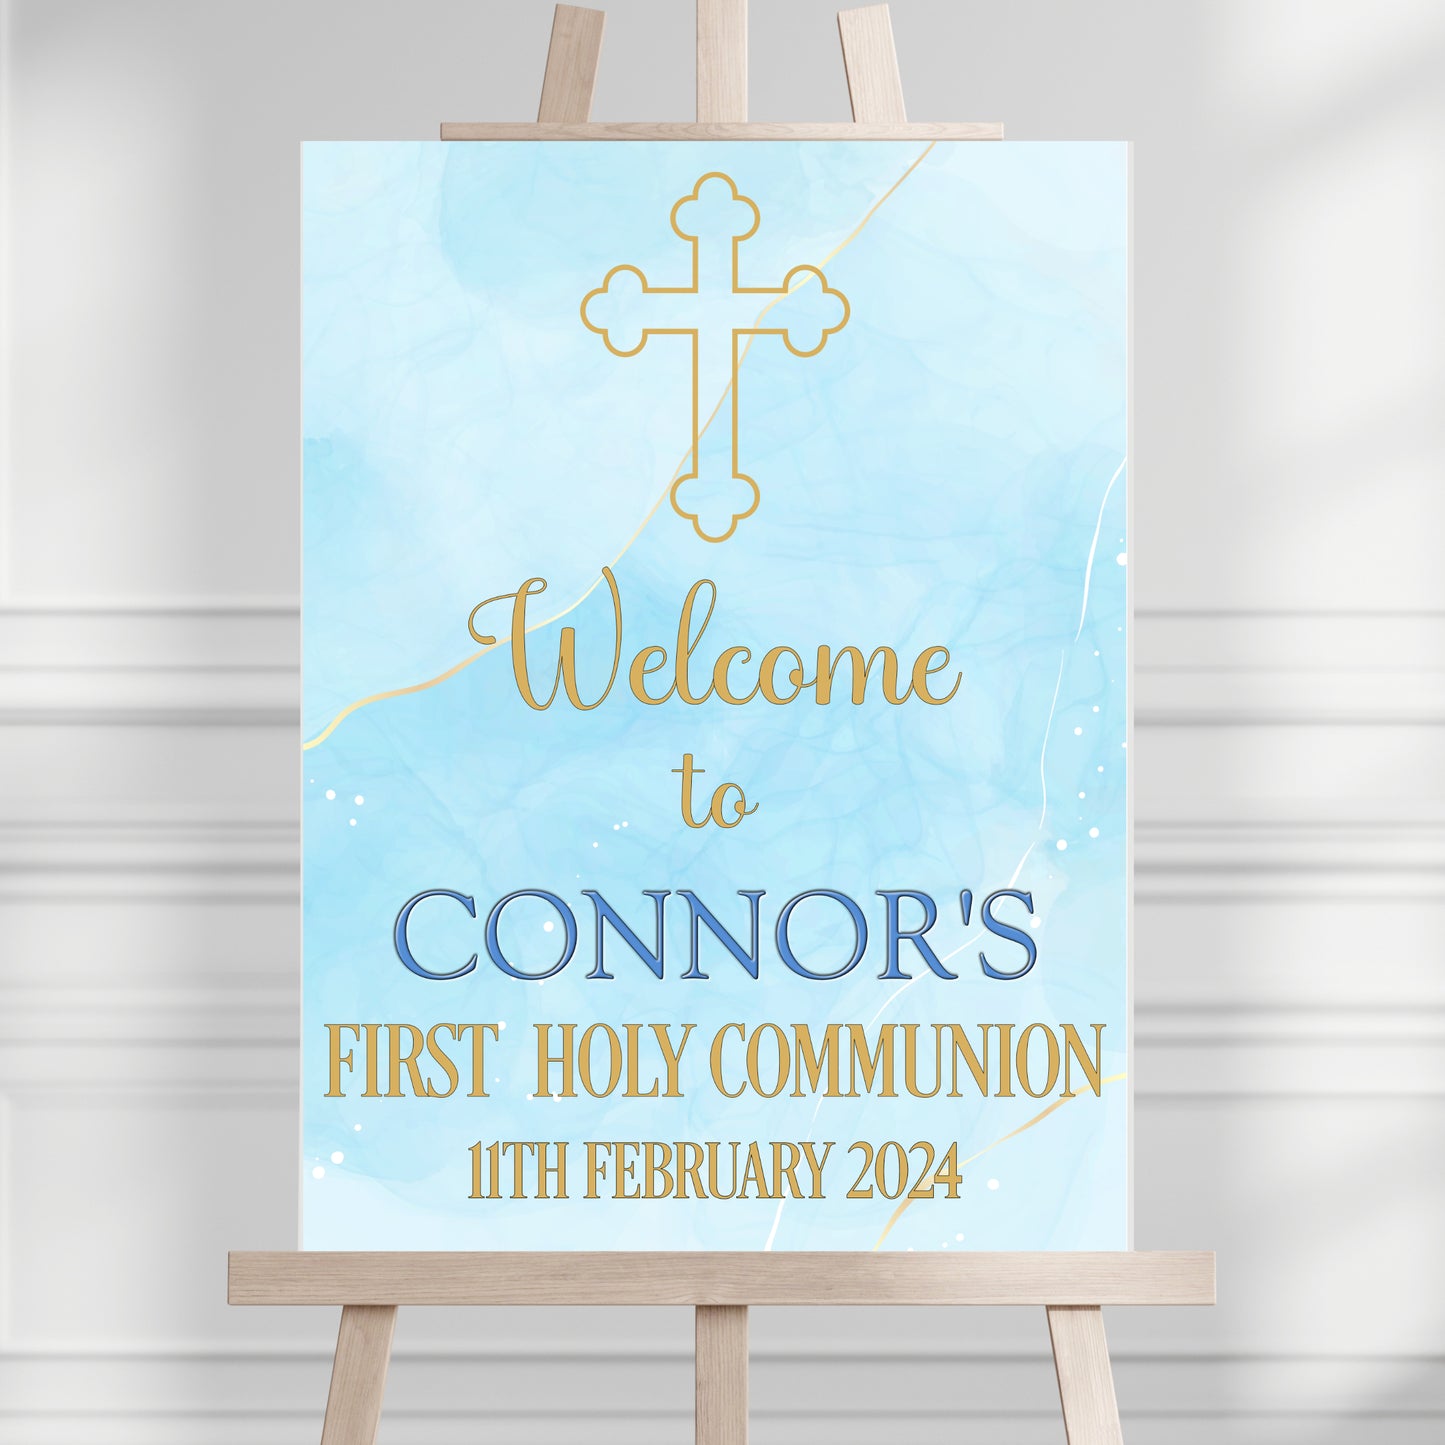 a wooden easel with a sign that says welcome to connor's first holy